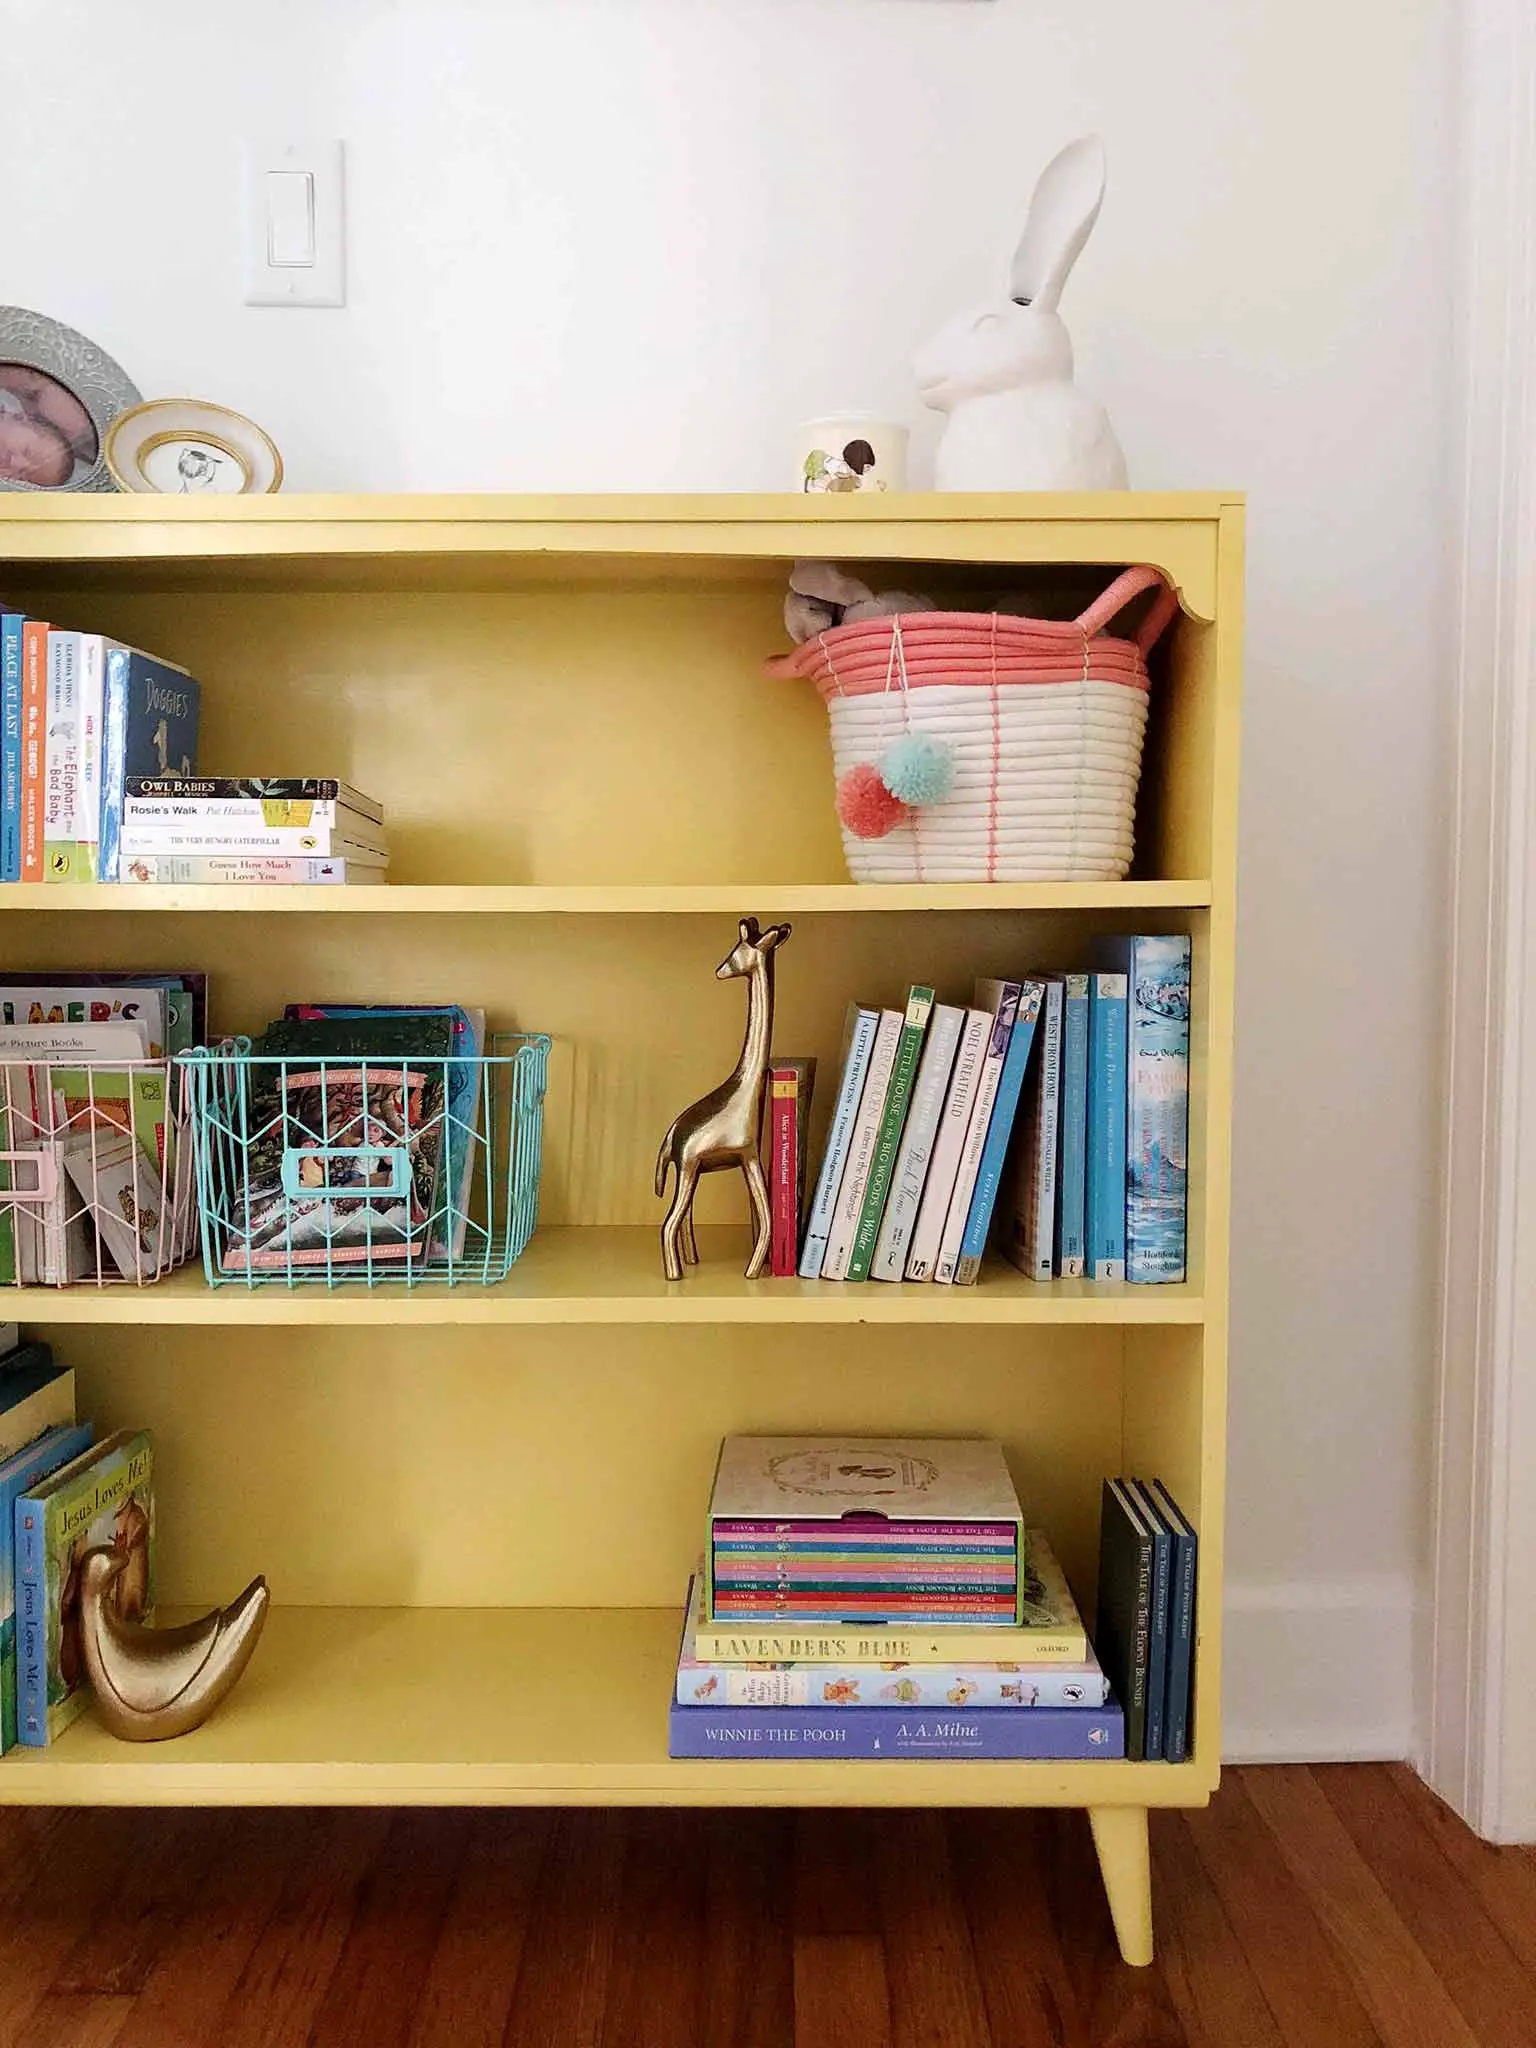 Book shelf styling - How to Declutter, Organize and Style Kids' Books - That Homebird Life Blog